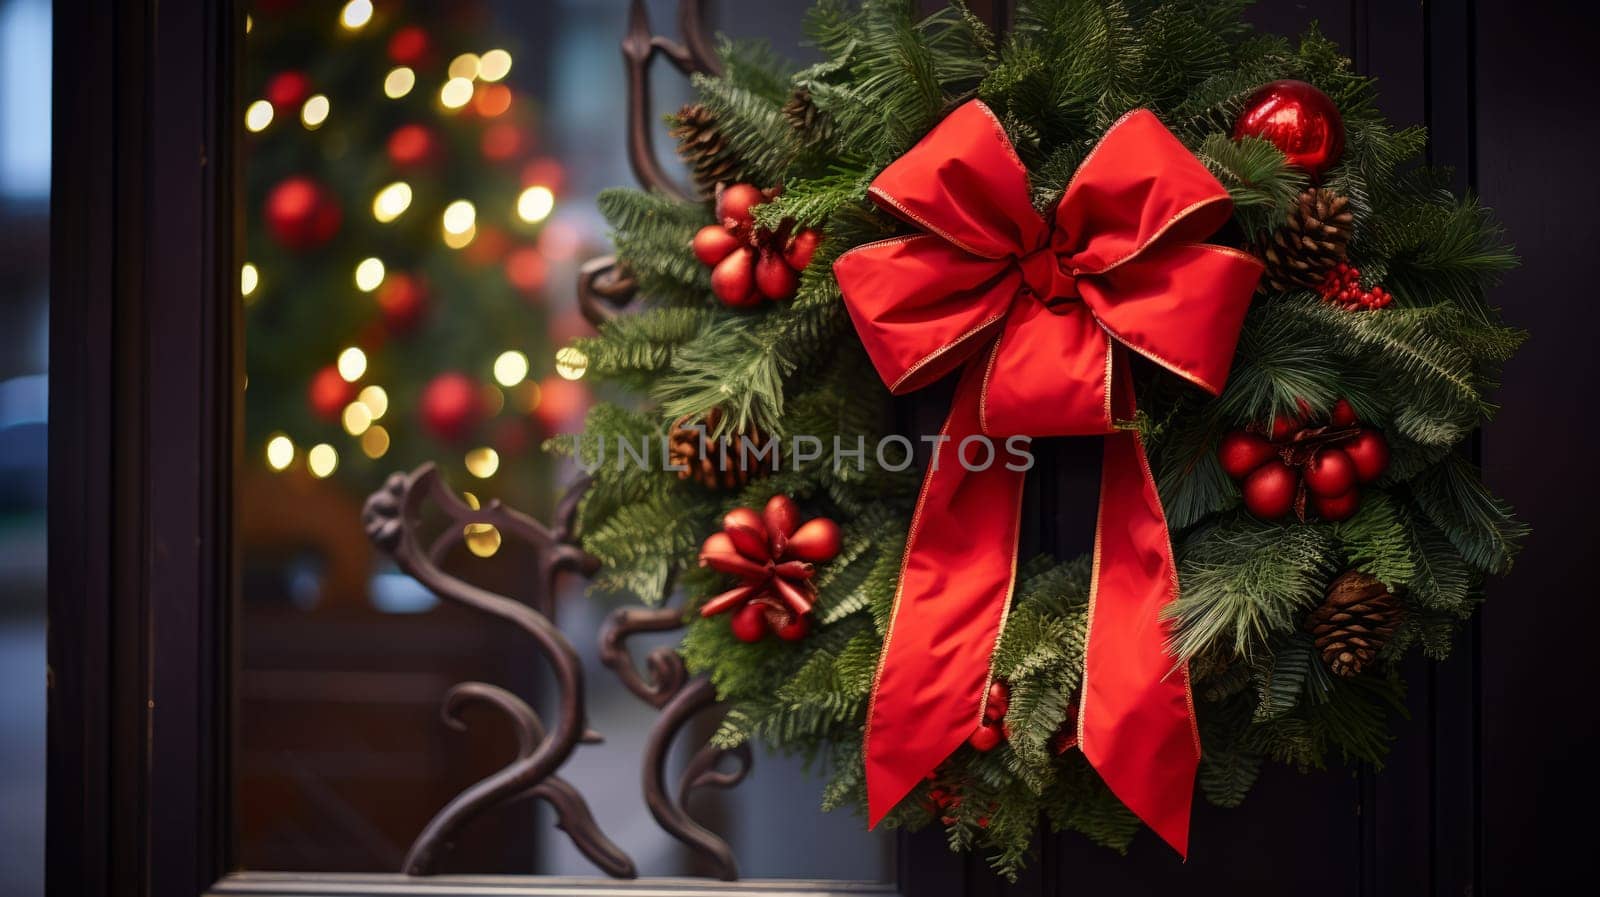 Christmas wreath with a red bow hanging on a window with a Christmas tree in the background. It is a festive decoration that symbolizes the holiday season. High quality photo